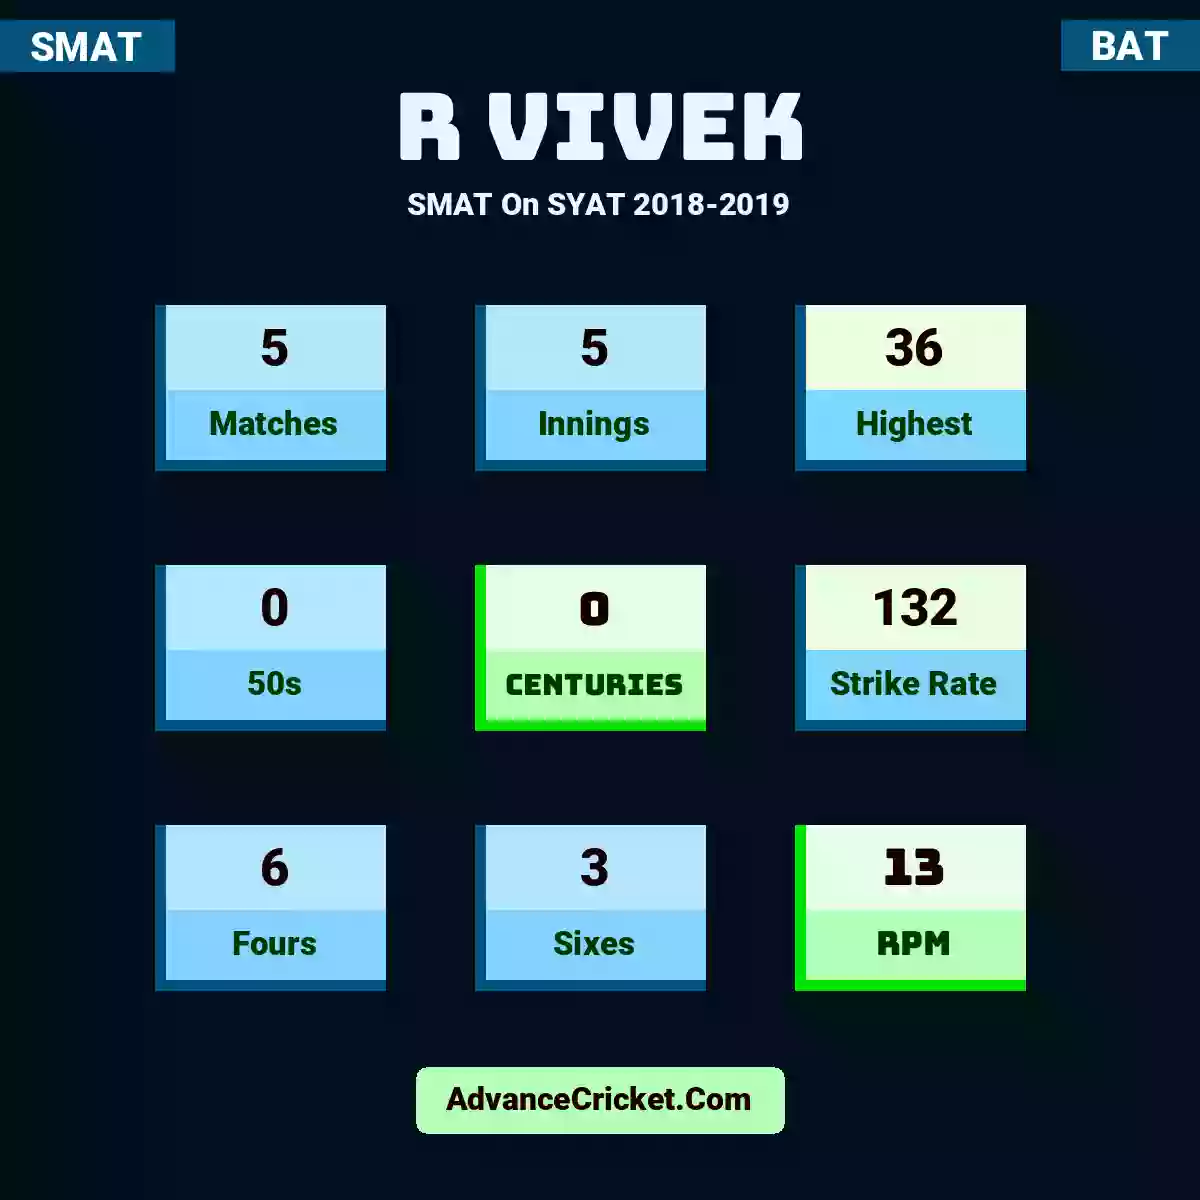 R Vivek SMAT  On SYAT 2018-2019, R Vivek played 5 matches, scored 36 runs as highest, 0 half-centuries, and 0 centuries, with a strike rate of 132. R.Vivek hit 6 fours and 3 sixes, with an RPM of 13.